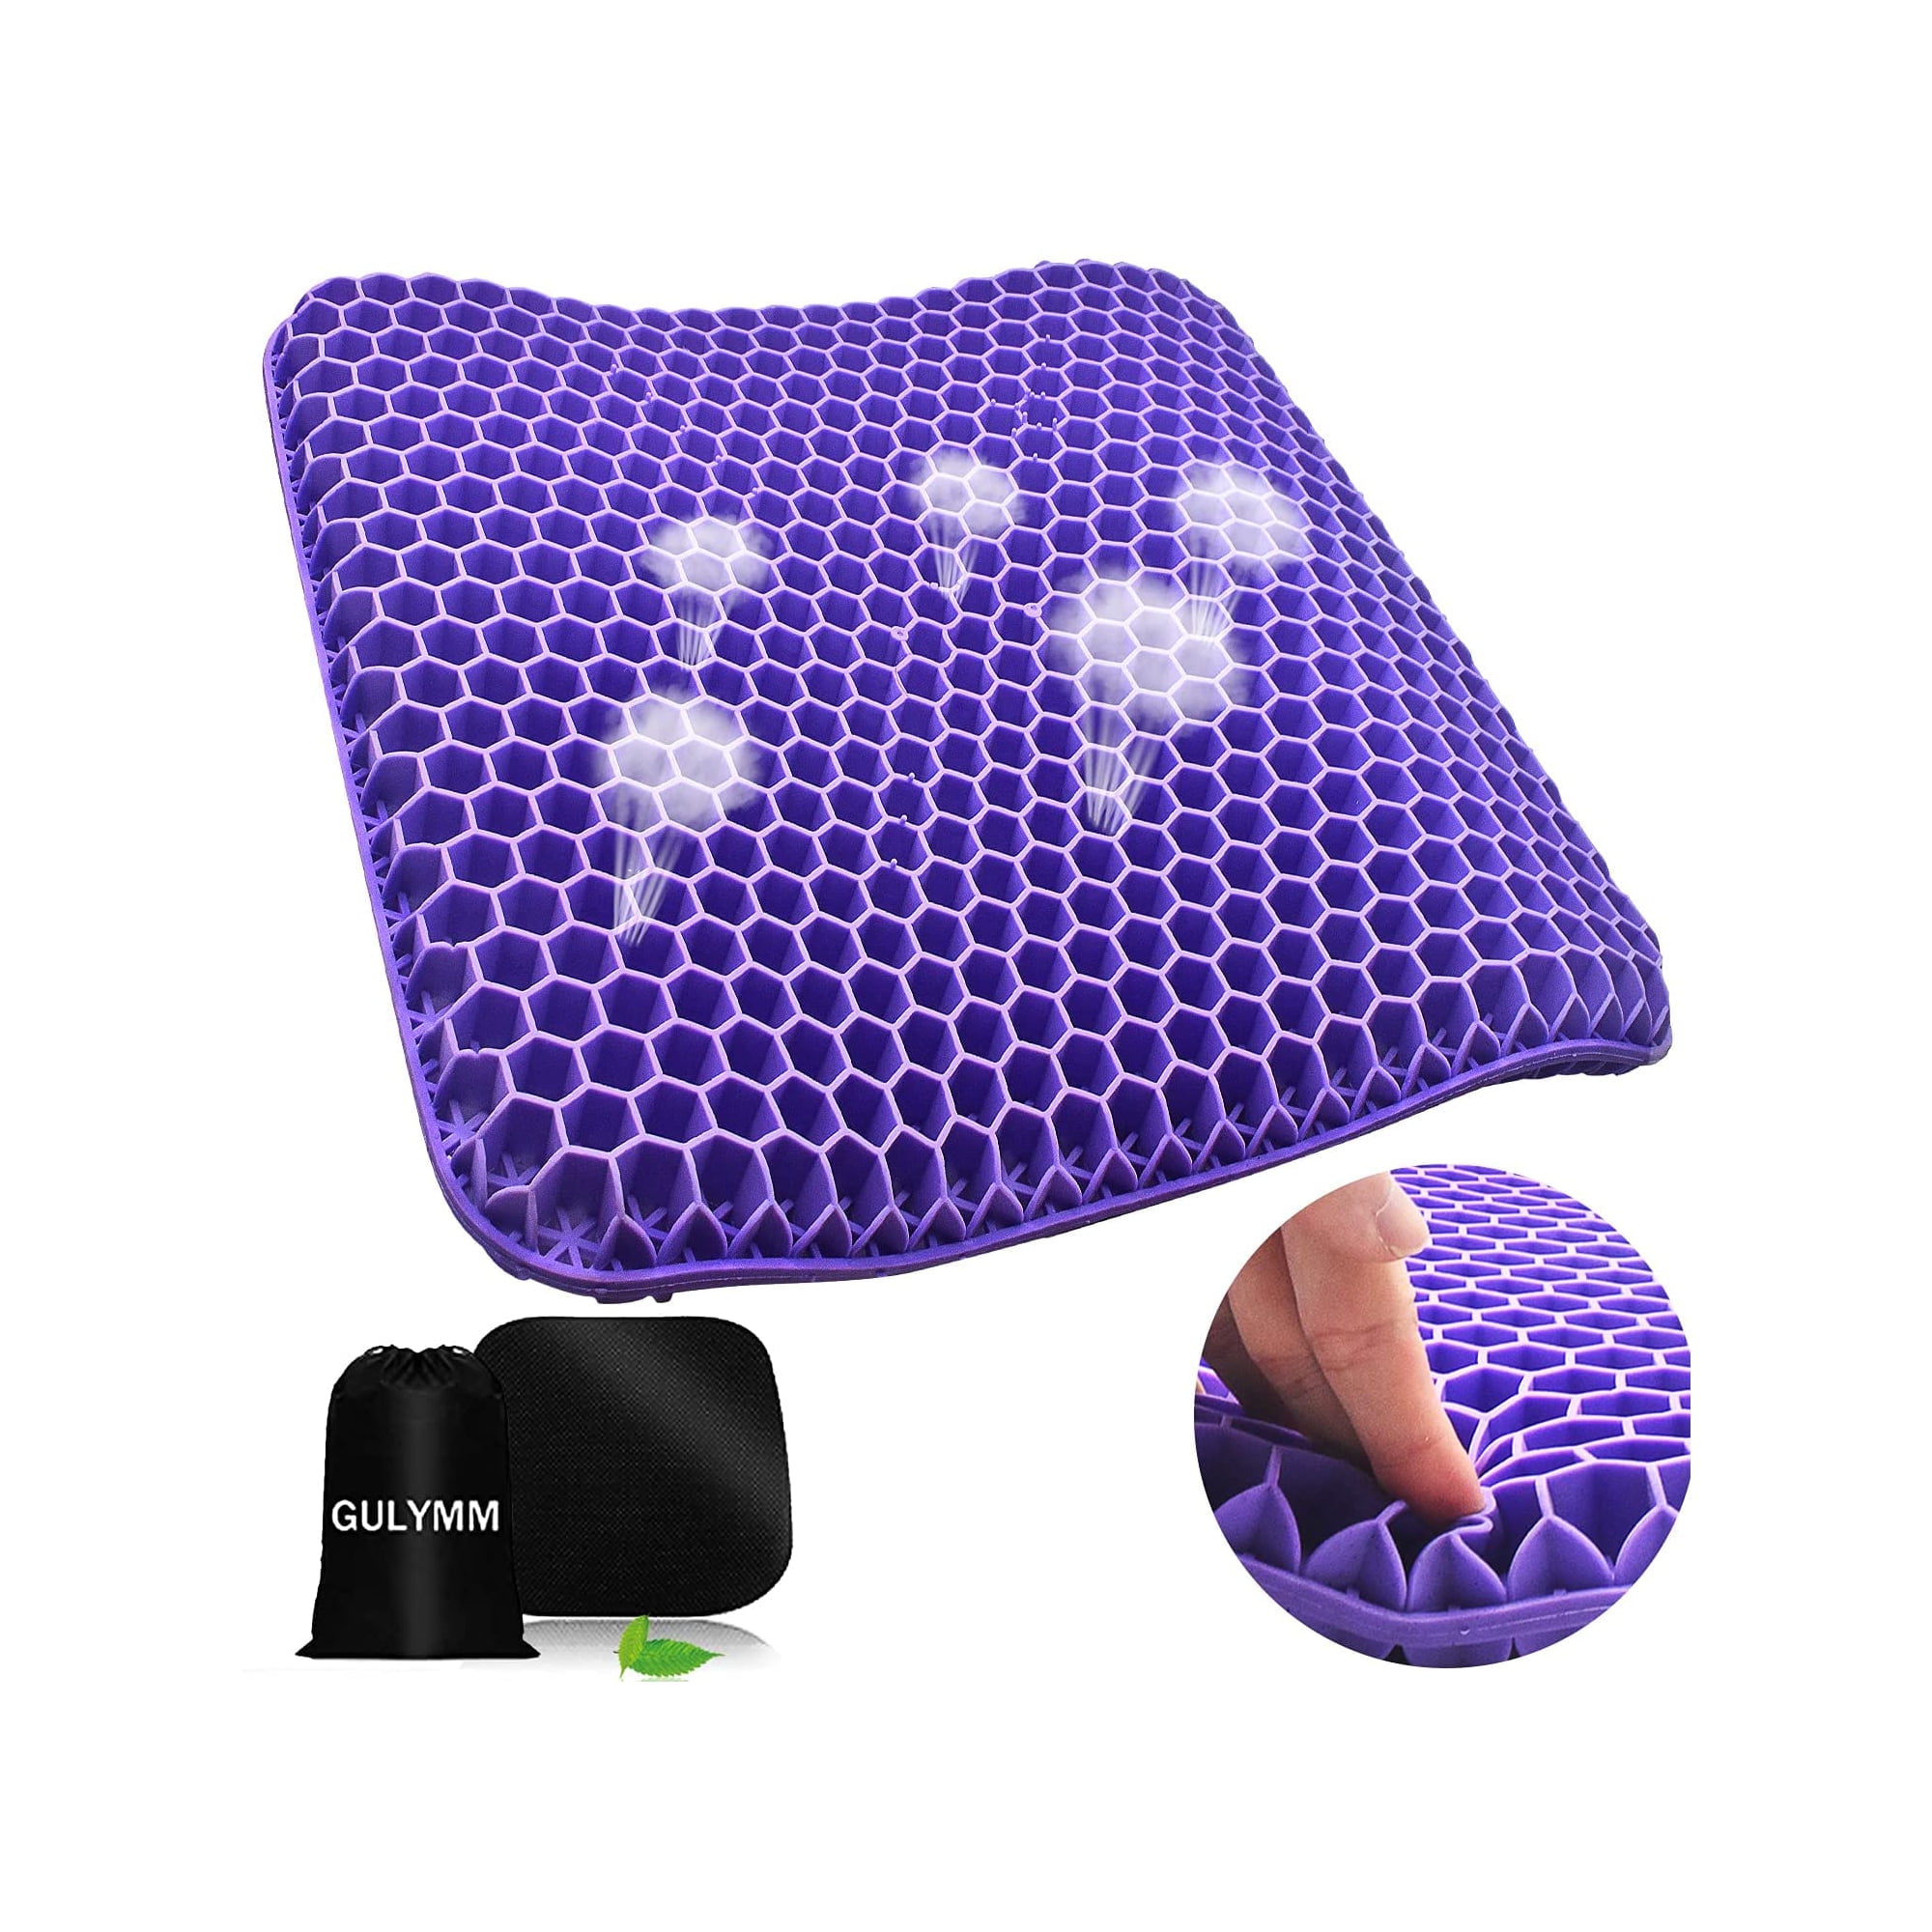 Gel Seat Cushion for Long Sitting - Portable Gel Cushion with Ergonomic  Honeycomb Design - Small Size 14.5 x 12 x 1.5 